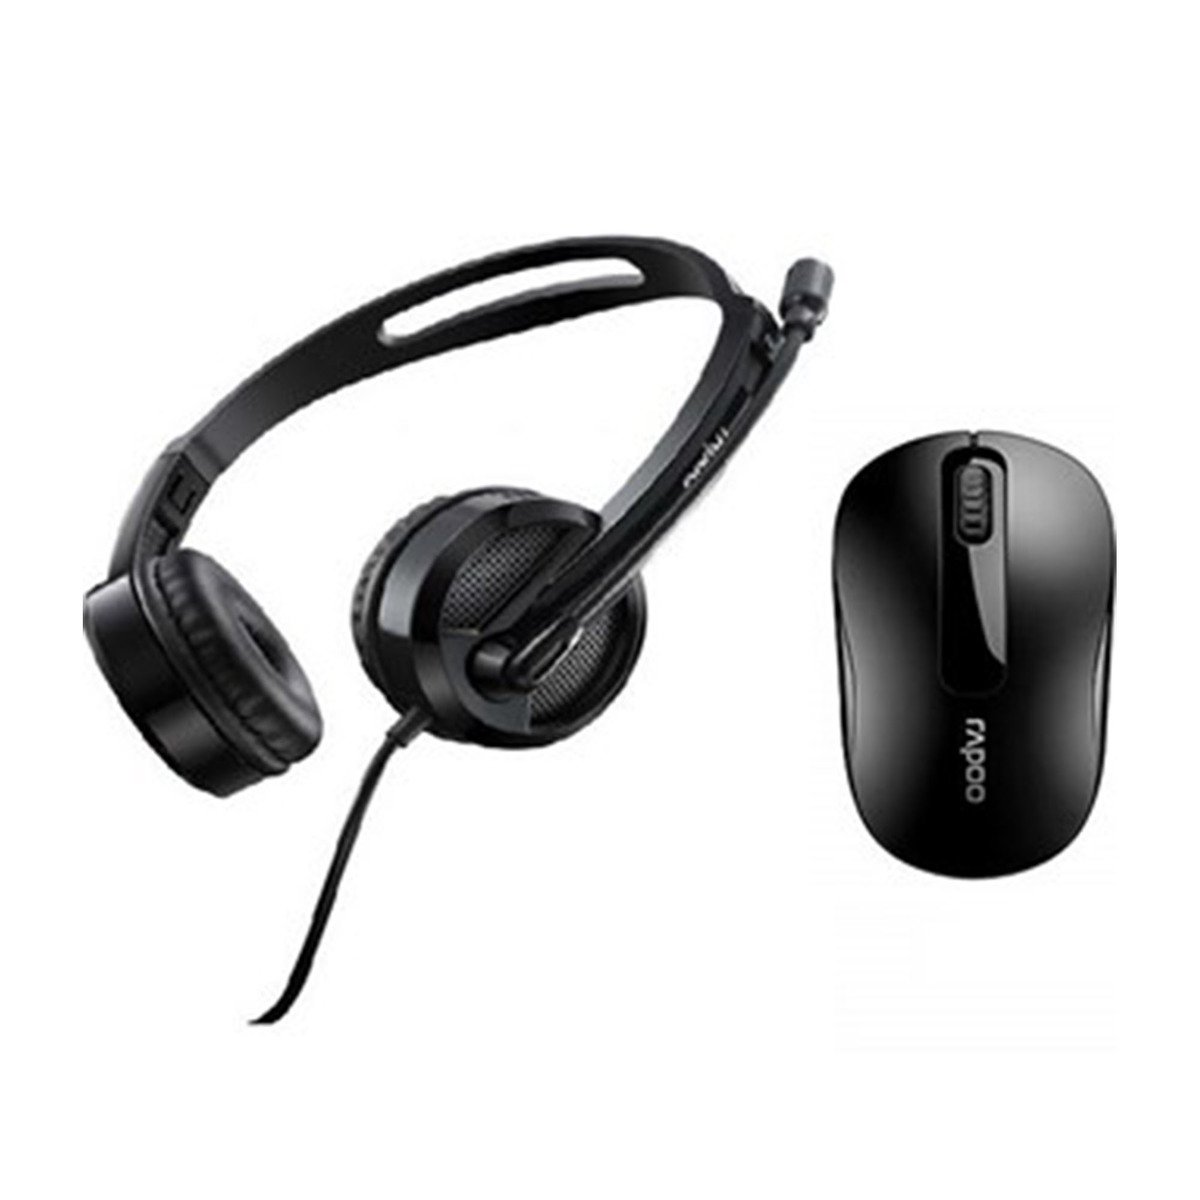 Rapoo Wired USB Headset H120 Black + Wireless Mouse M10